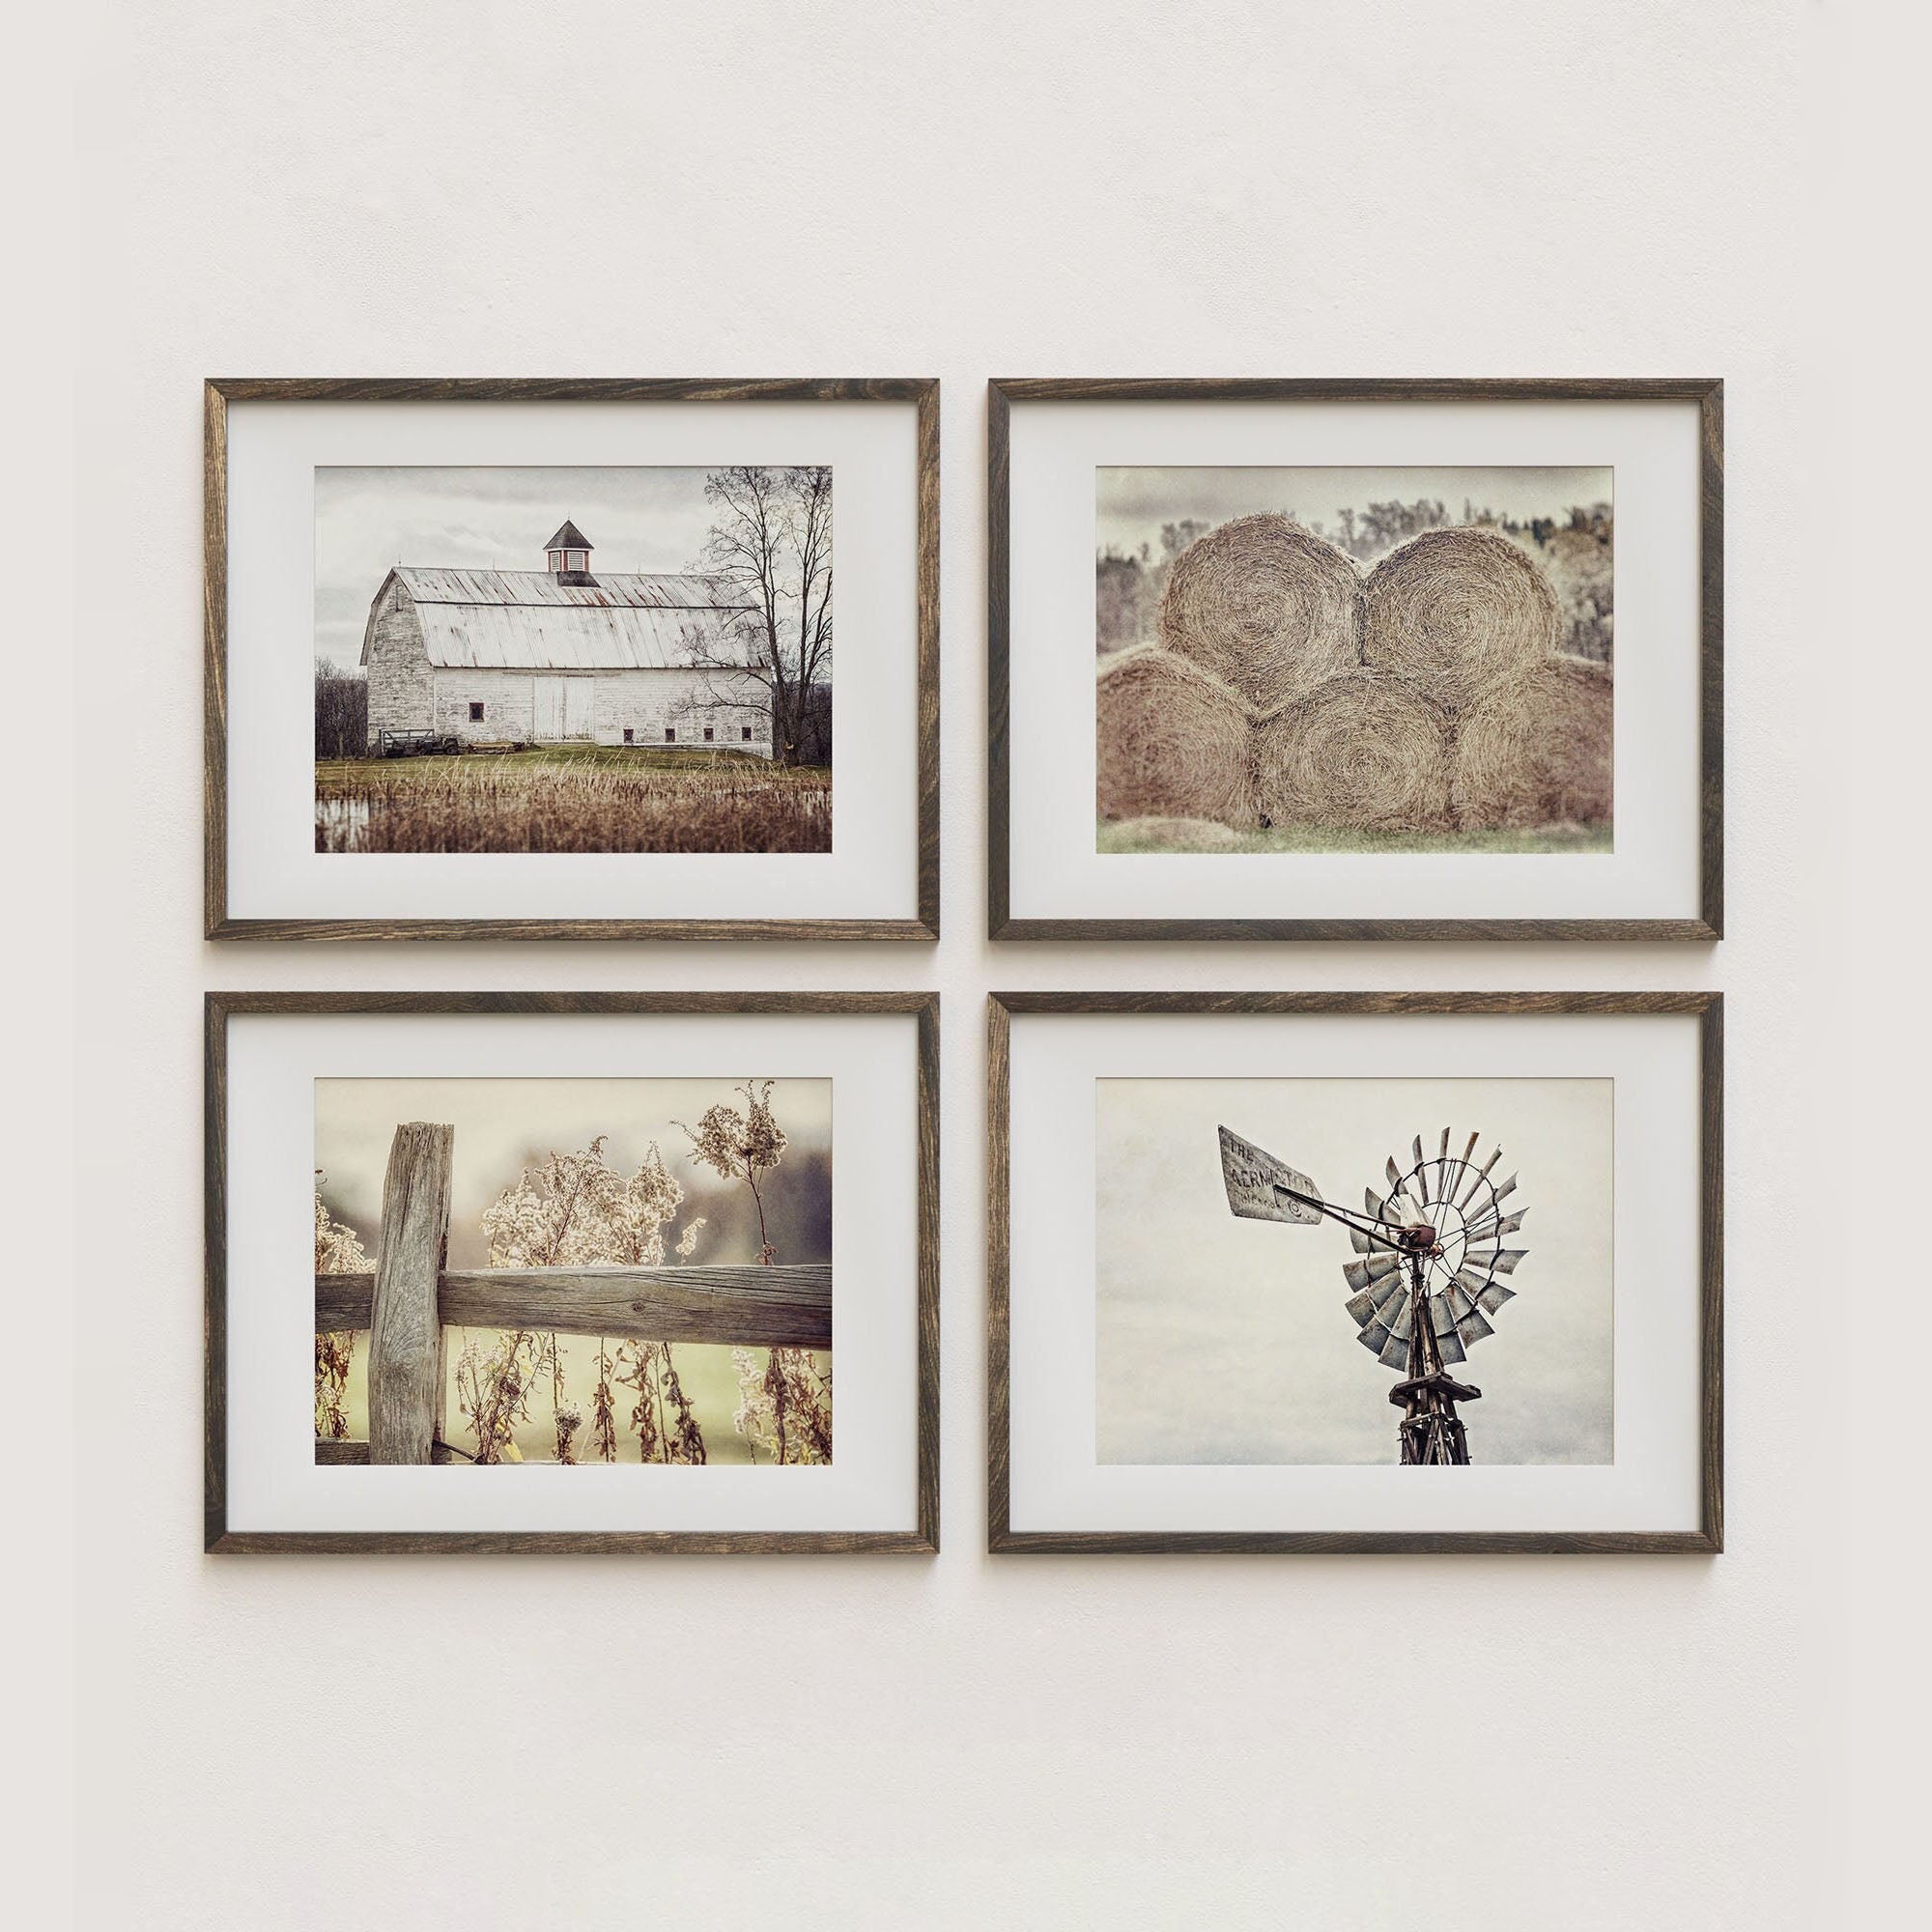 Farmhouse Kitchen Wall Decor Set of 3 Art Prints or Canvas in Warm Brown